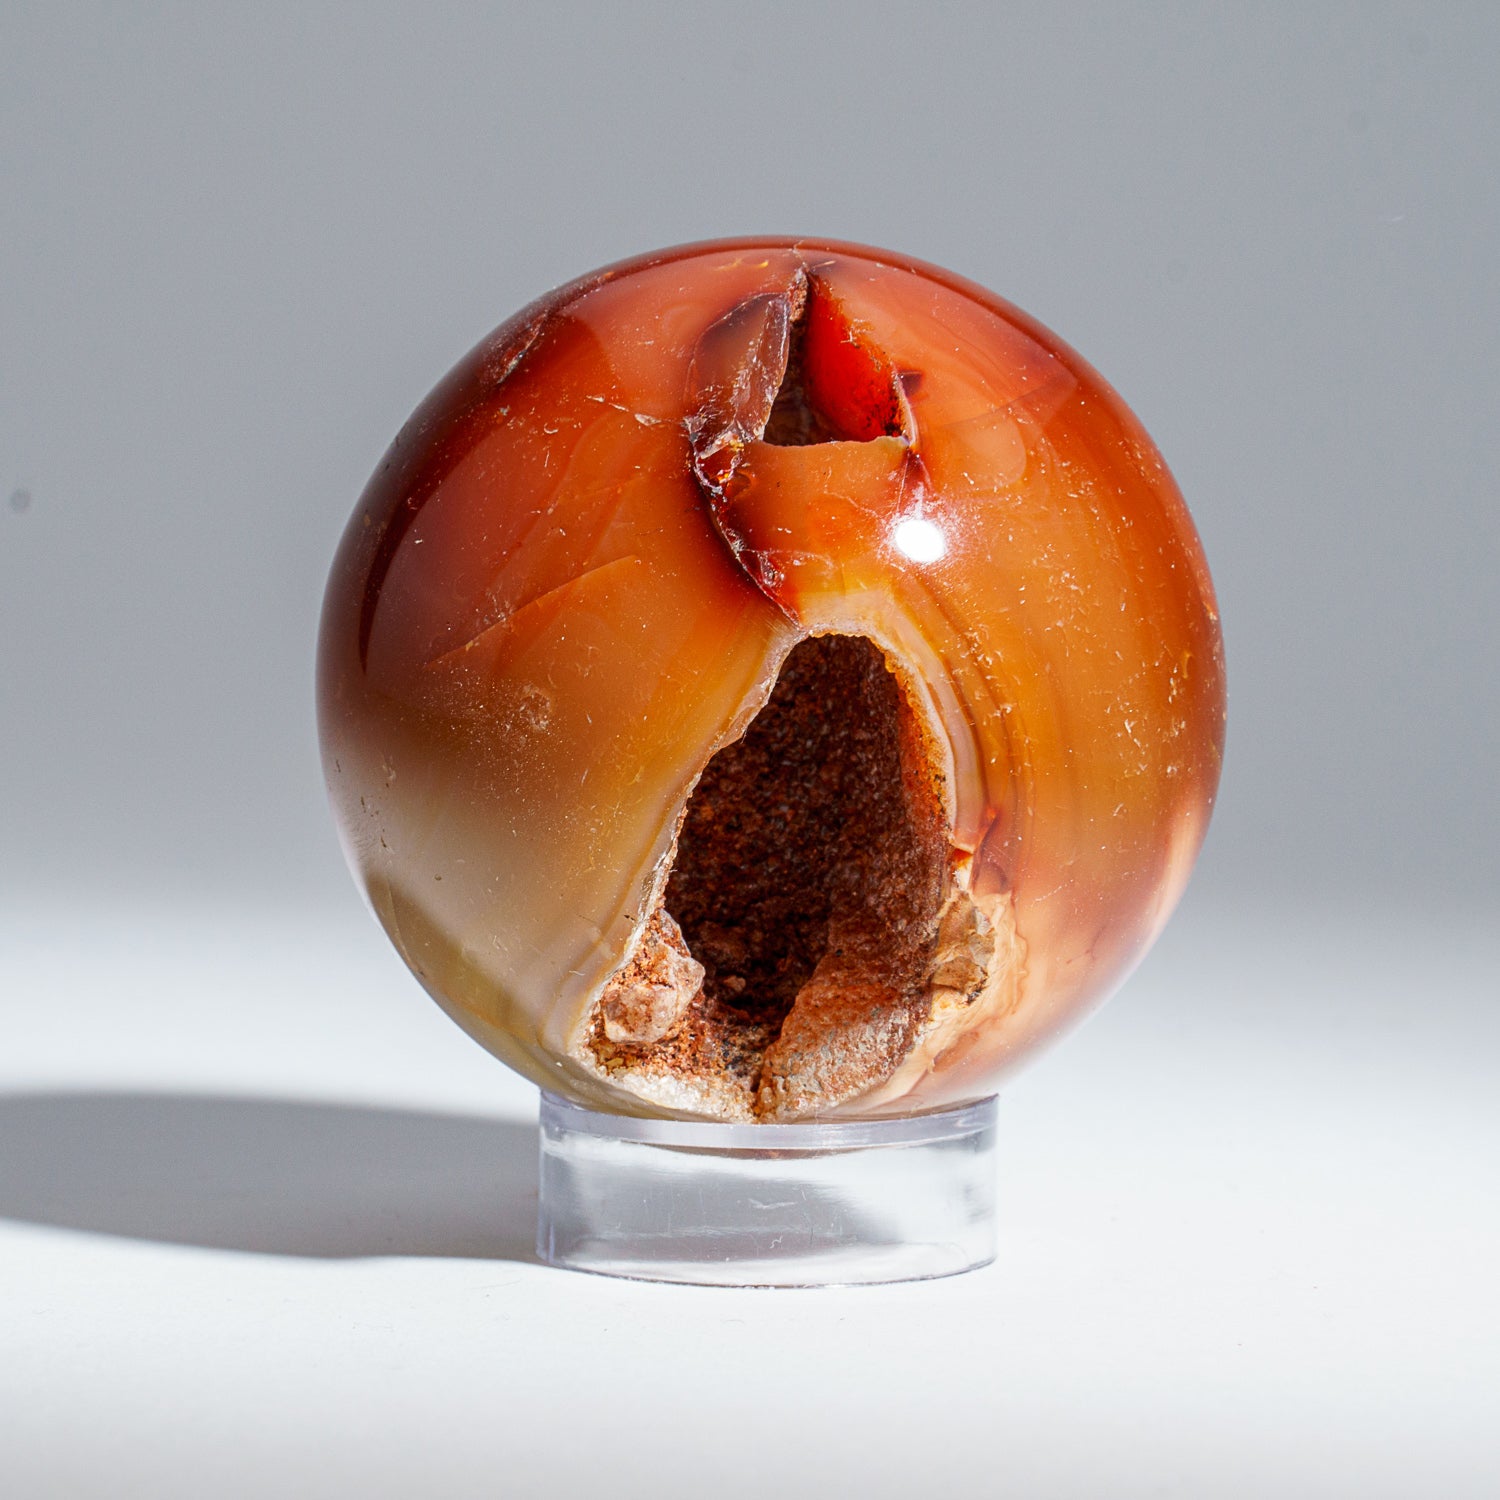 Polished Carnelian Agate Sphere from Madagascar (293 grams)